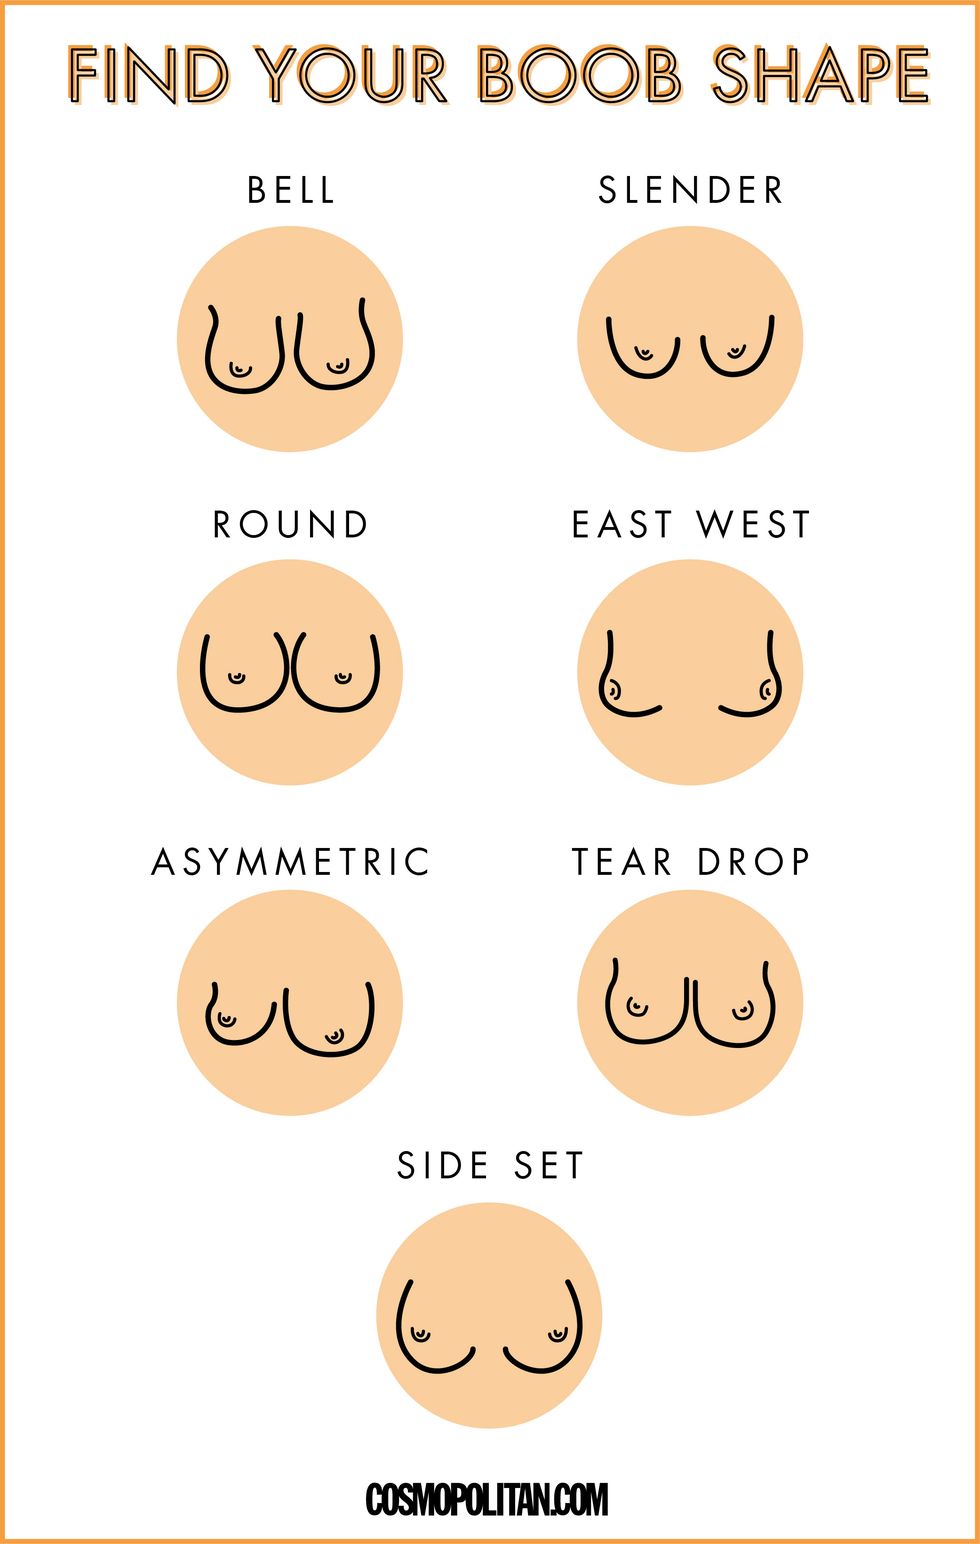 Are you one of the lucky 20% of women who are wearing a properly sized bra?  If not, listen up! There are 4 aspects to look for when you